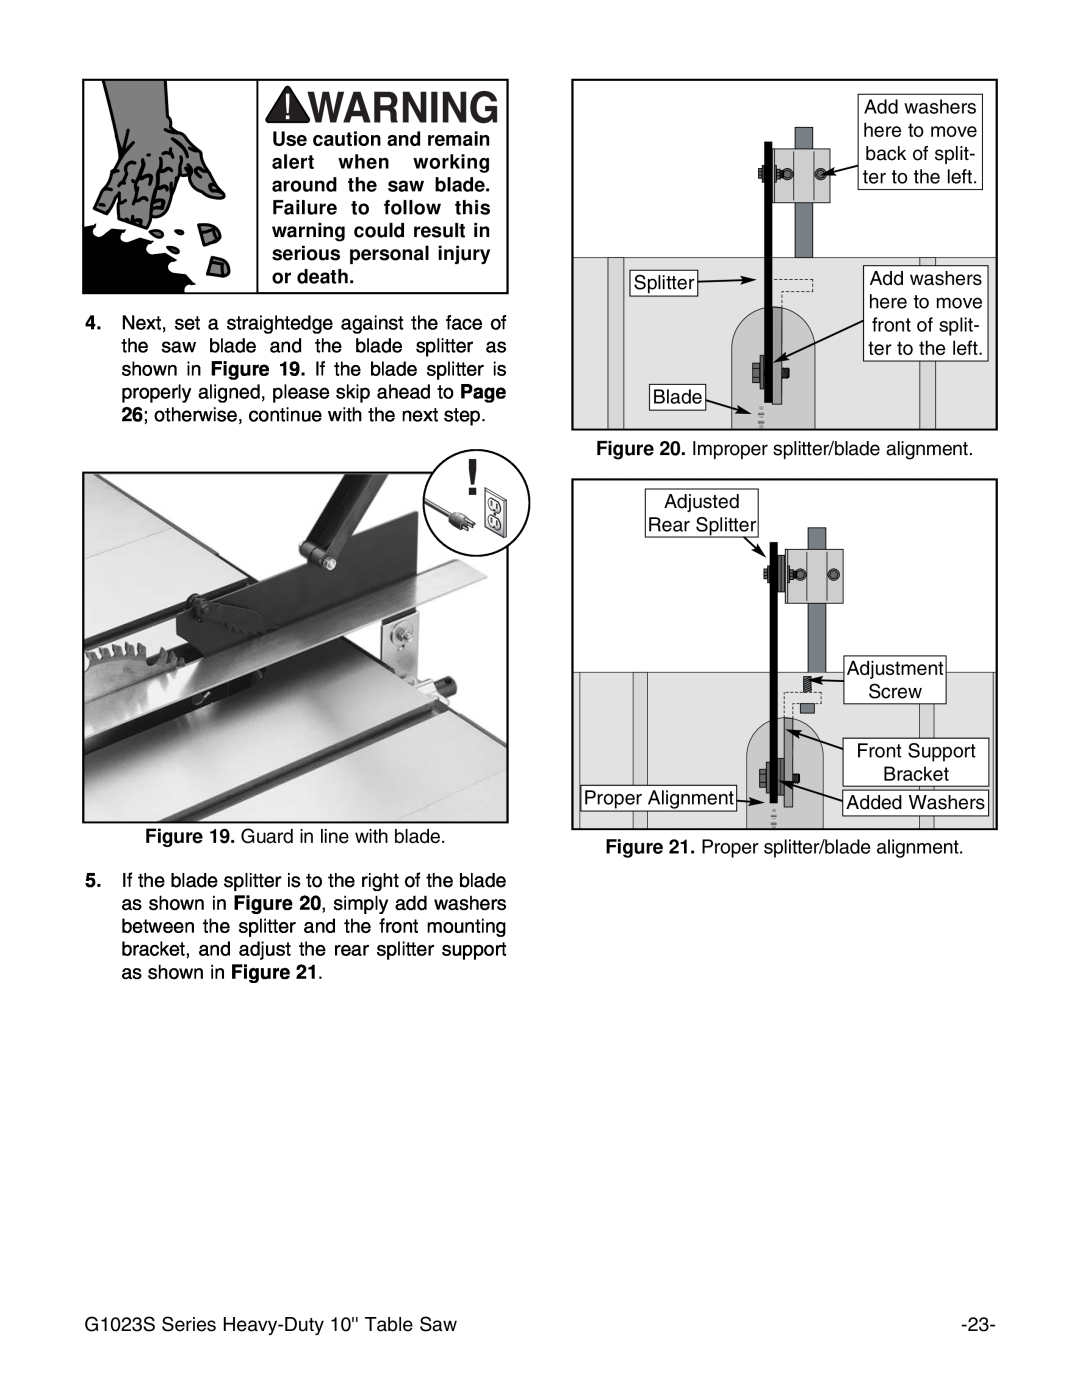 Grizzly MODEL instruction manual Screw, Added Washers 